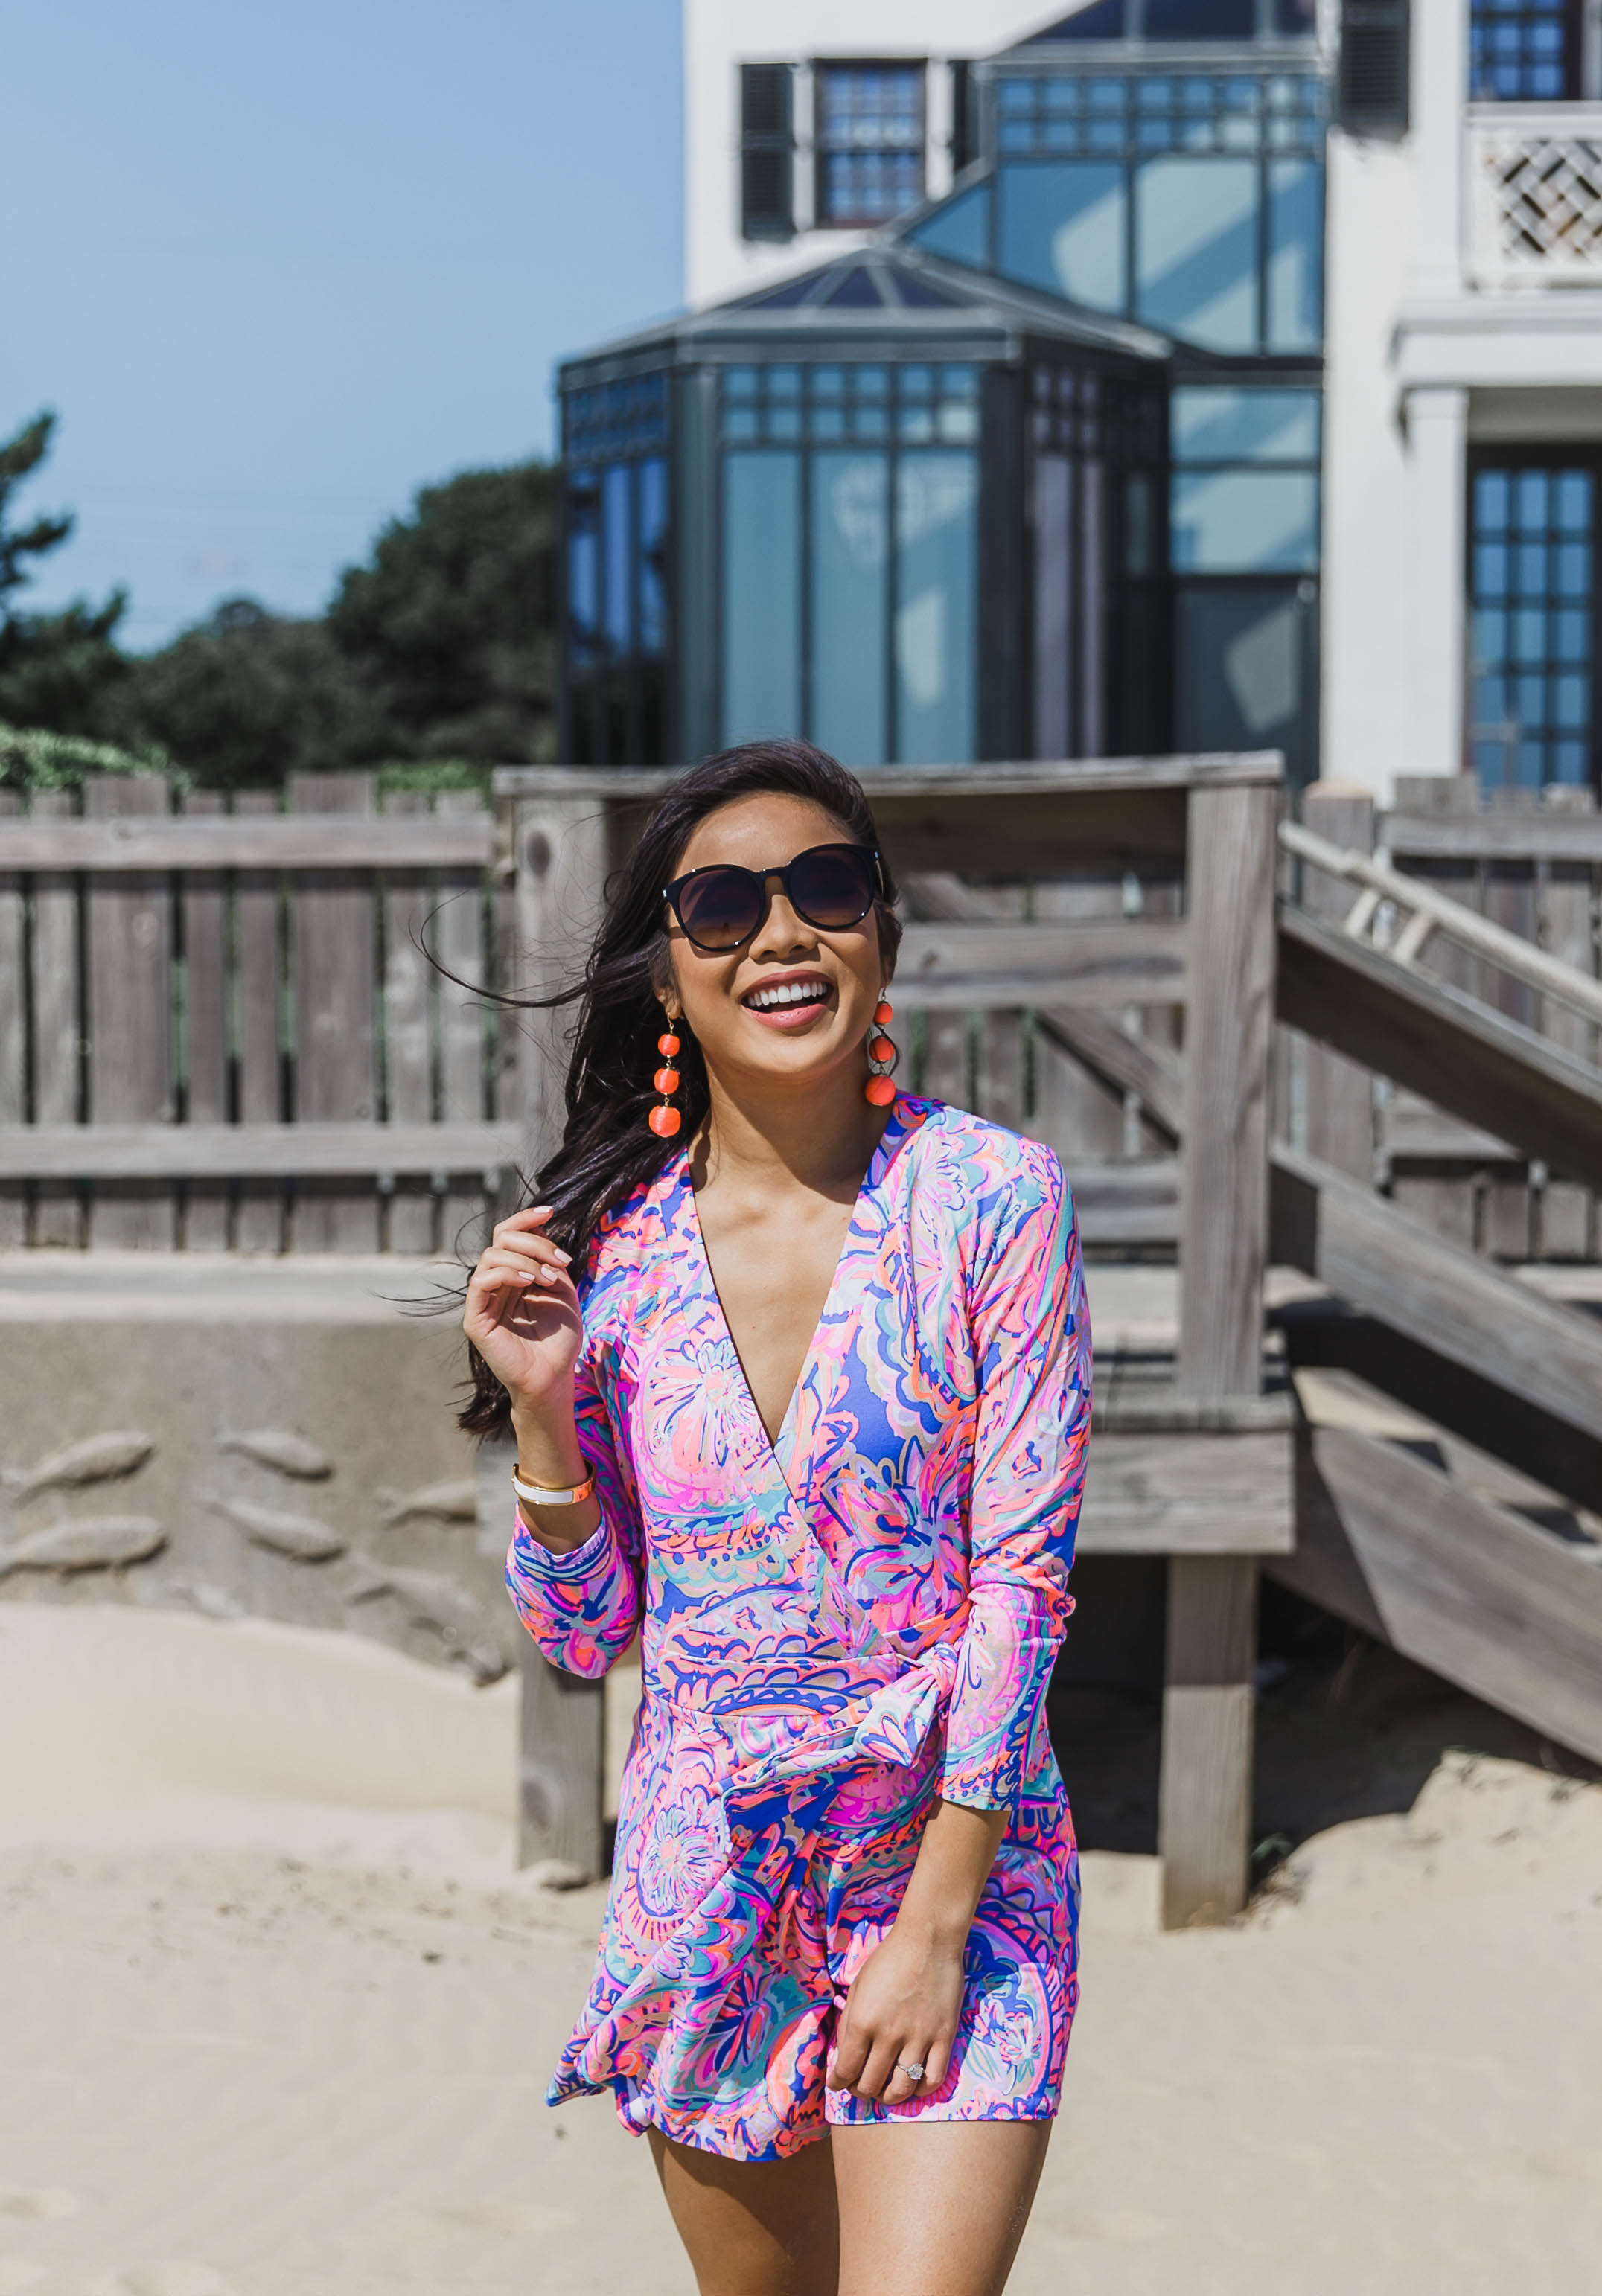 COLOR & CHIC | Colorful romper for summer